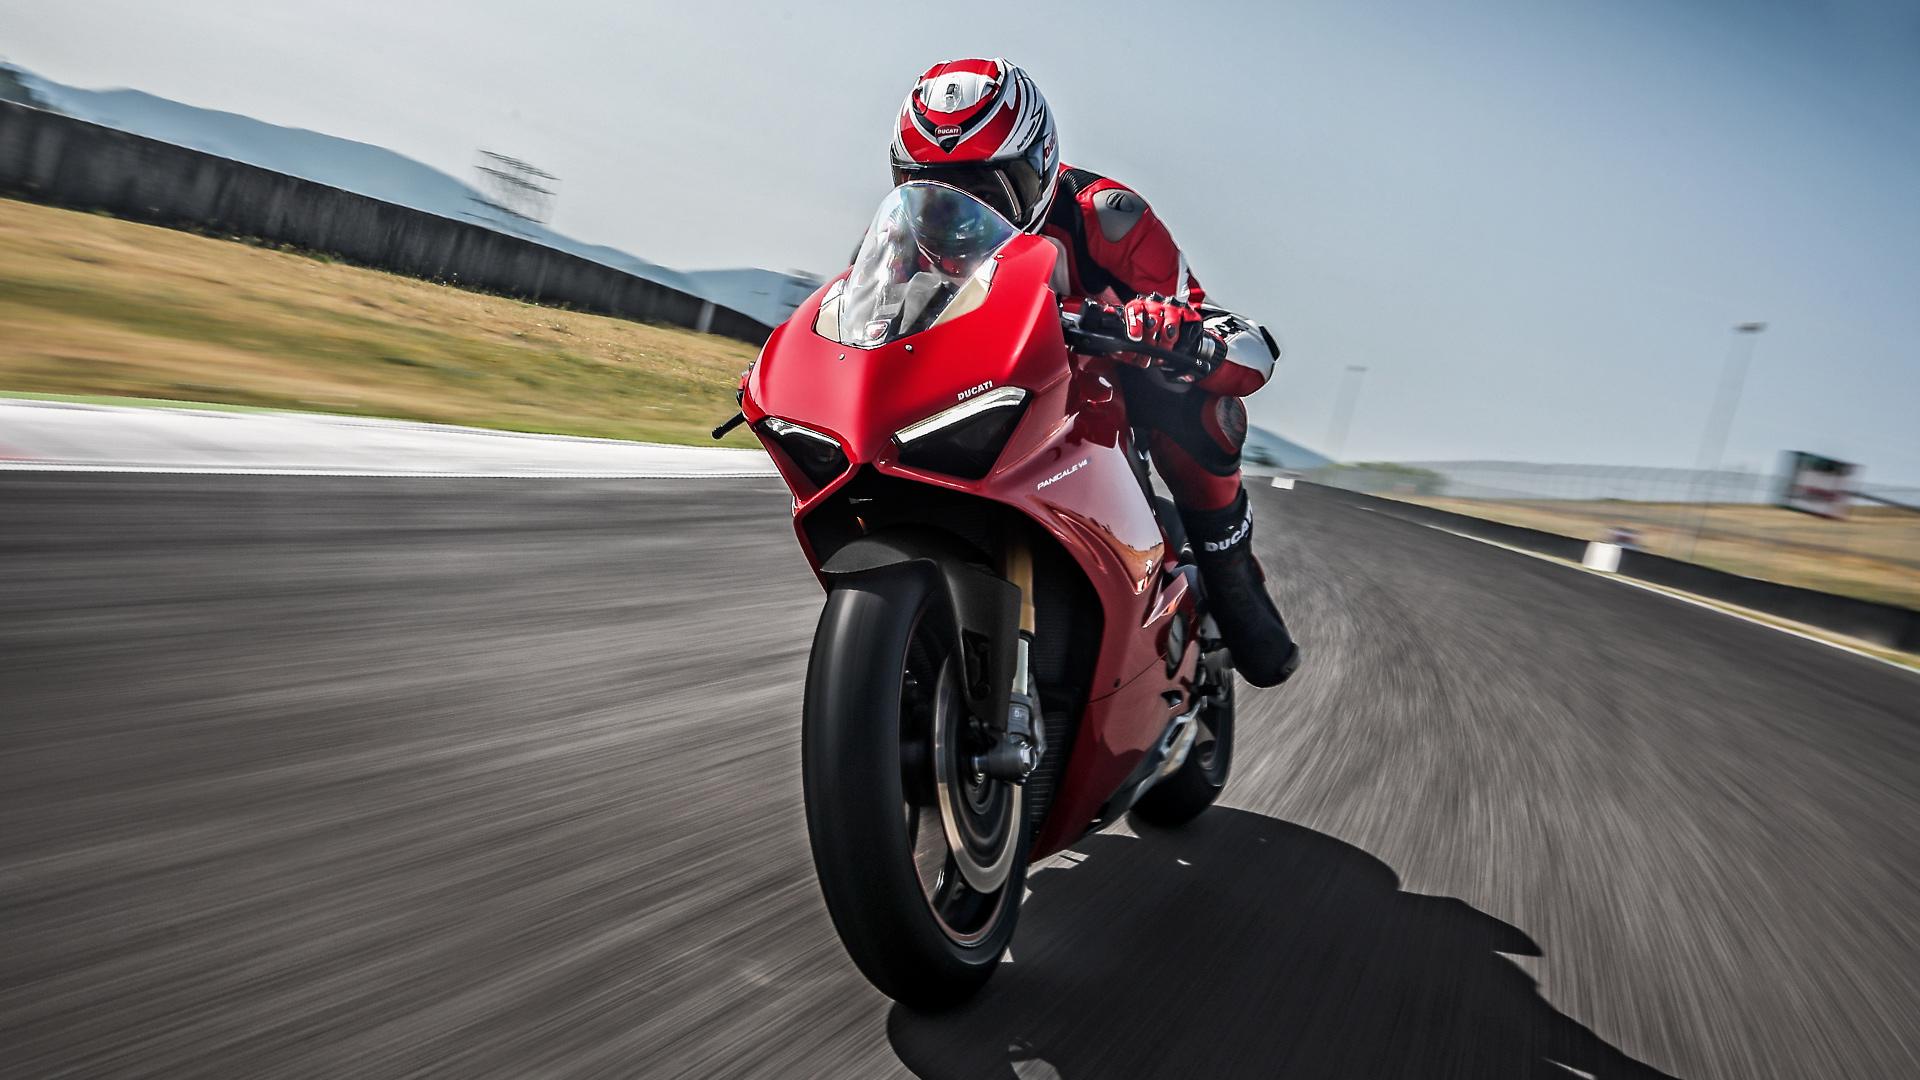 Ducati Panigale V4S Test Ride and Review: A Modern Marvel